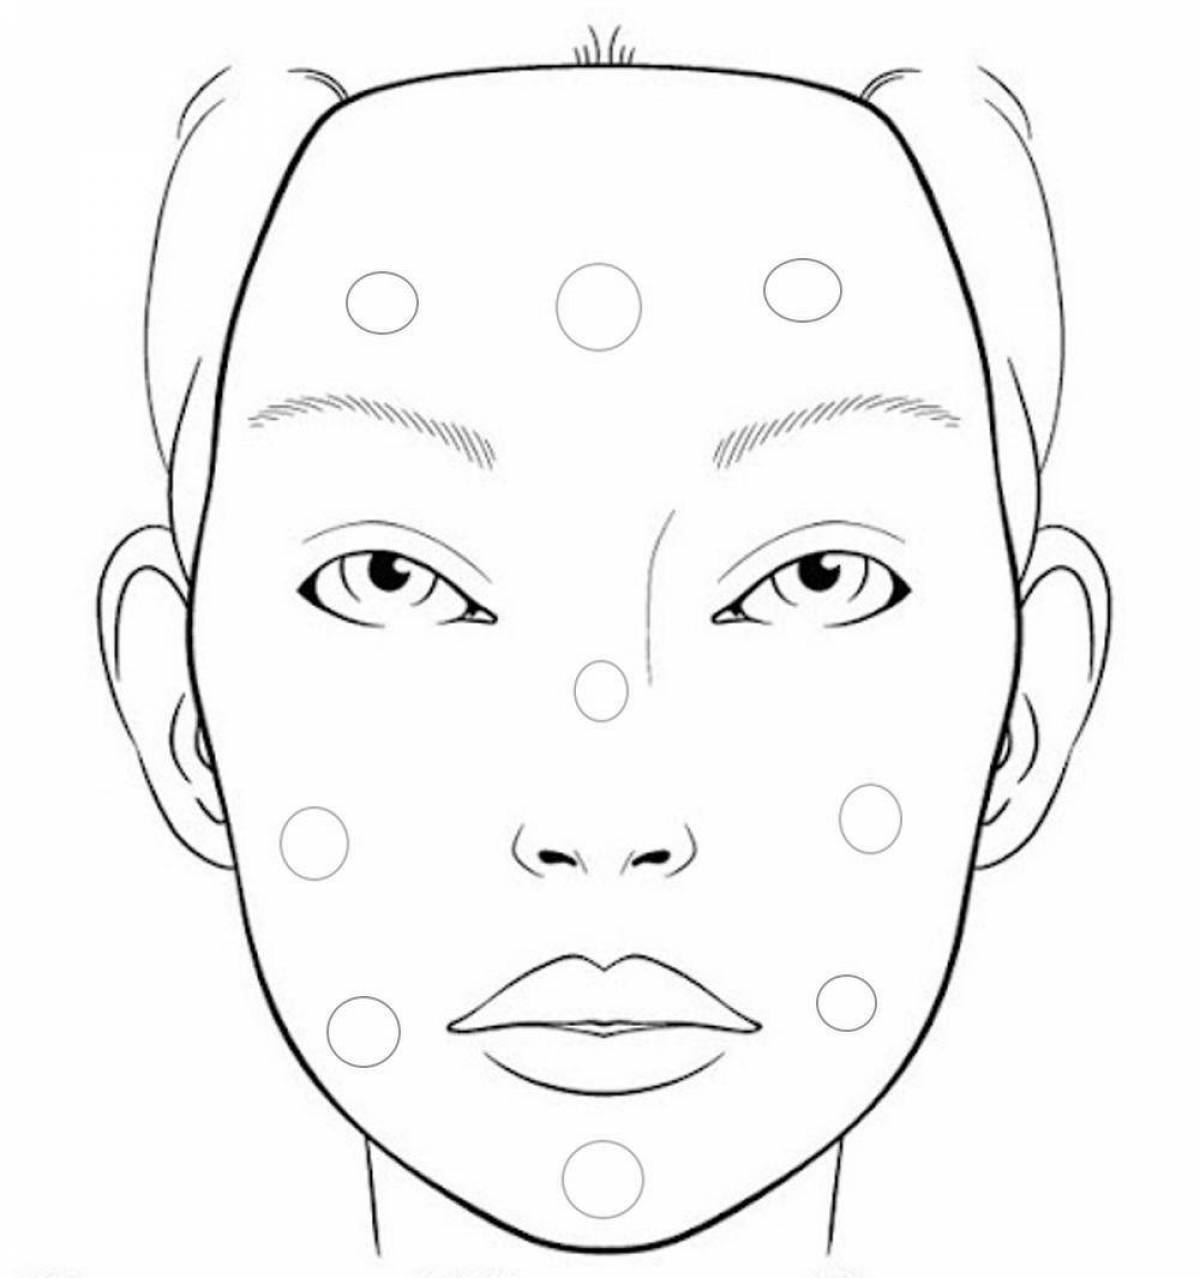 Mystic face coloring page